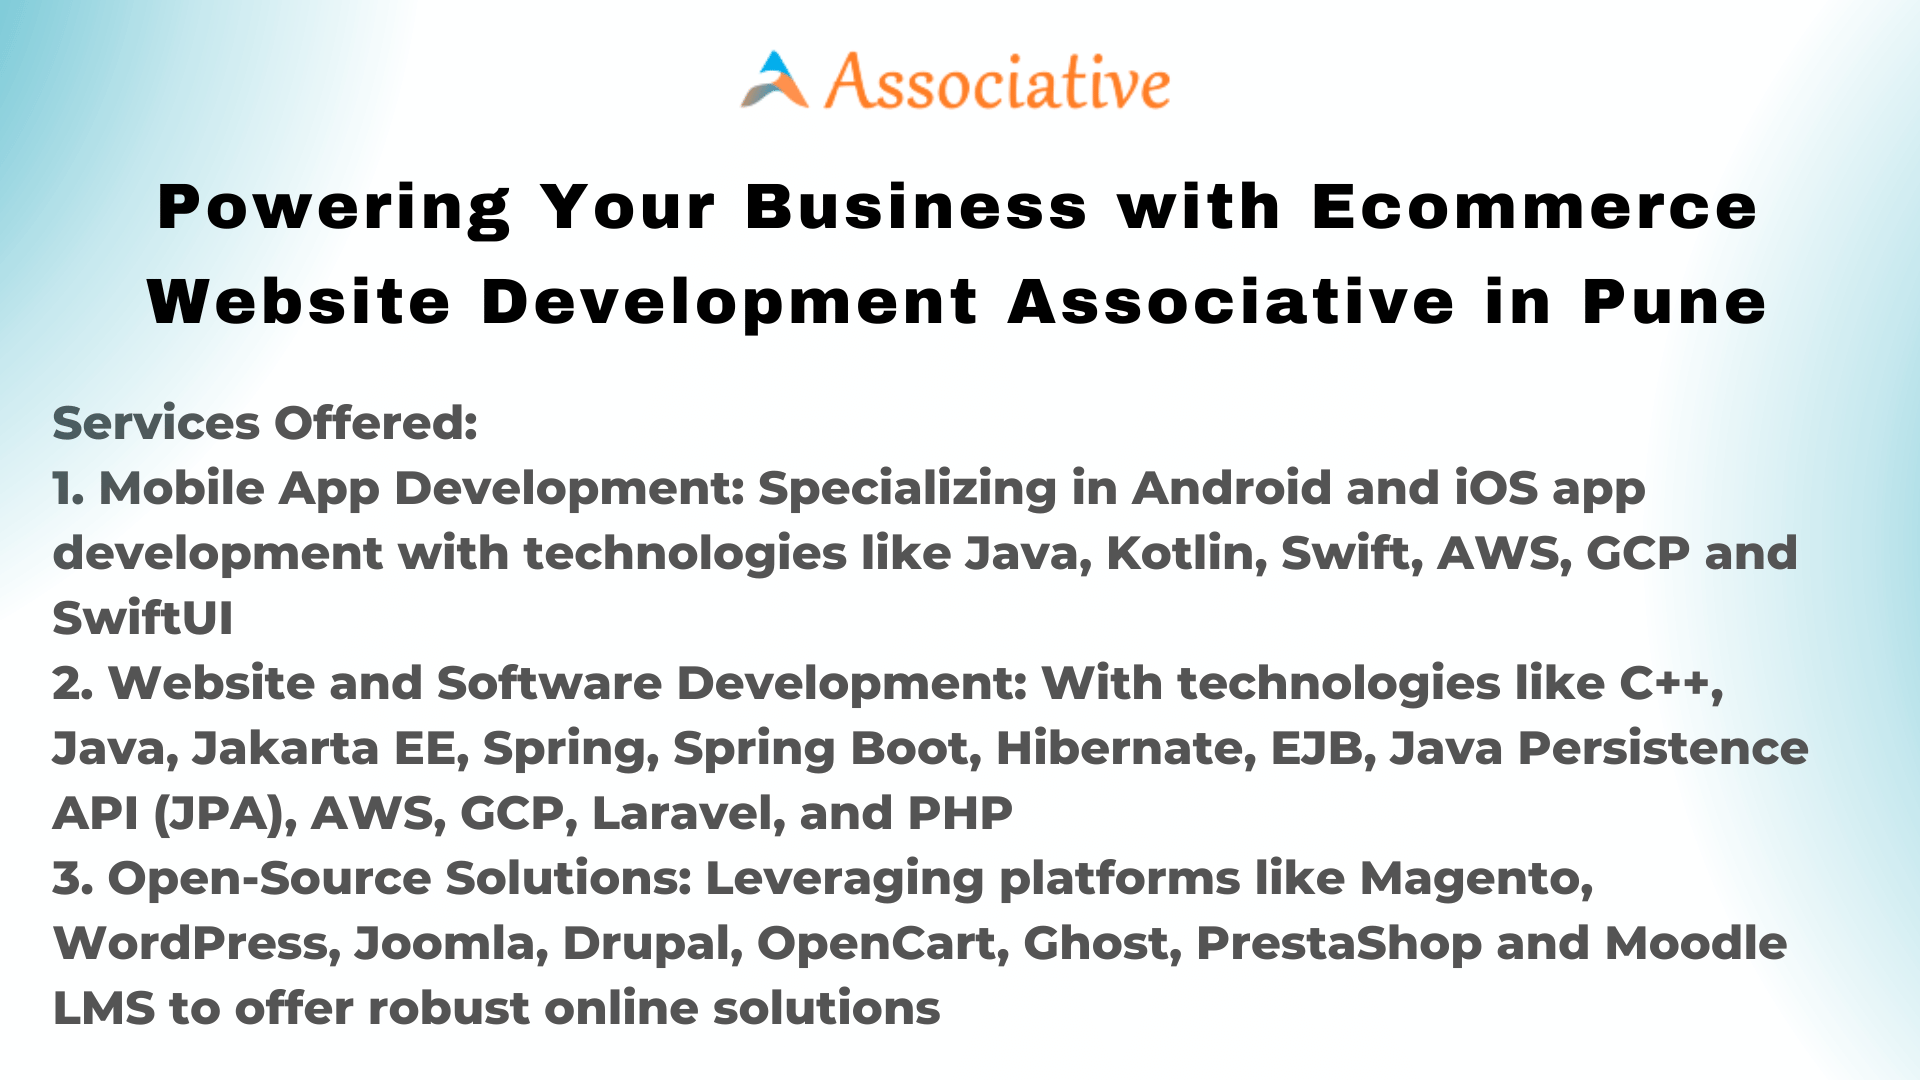 Powering Your Business with Ecommerce Website Development Associative in Pune